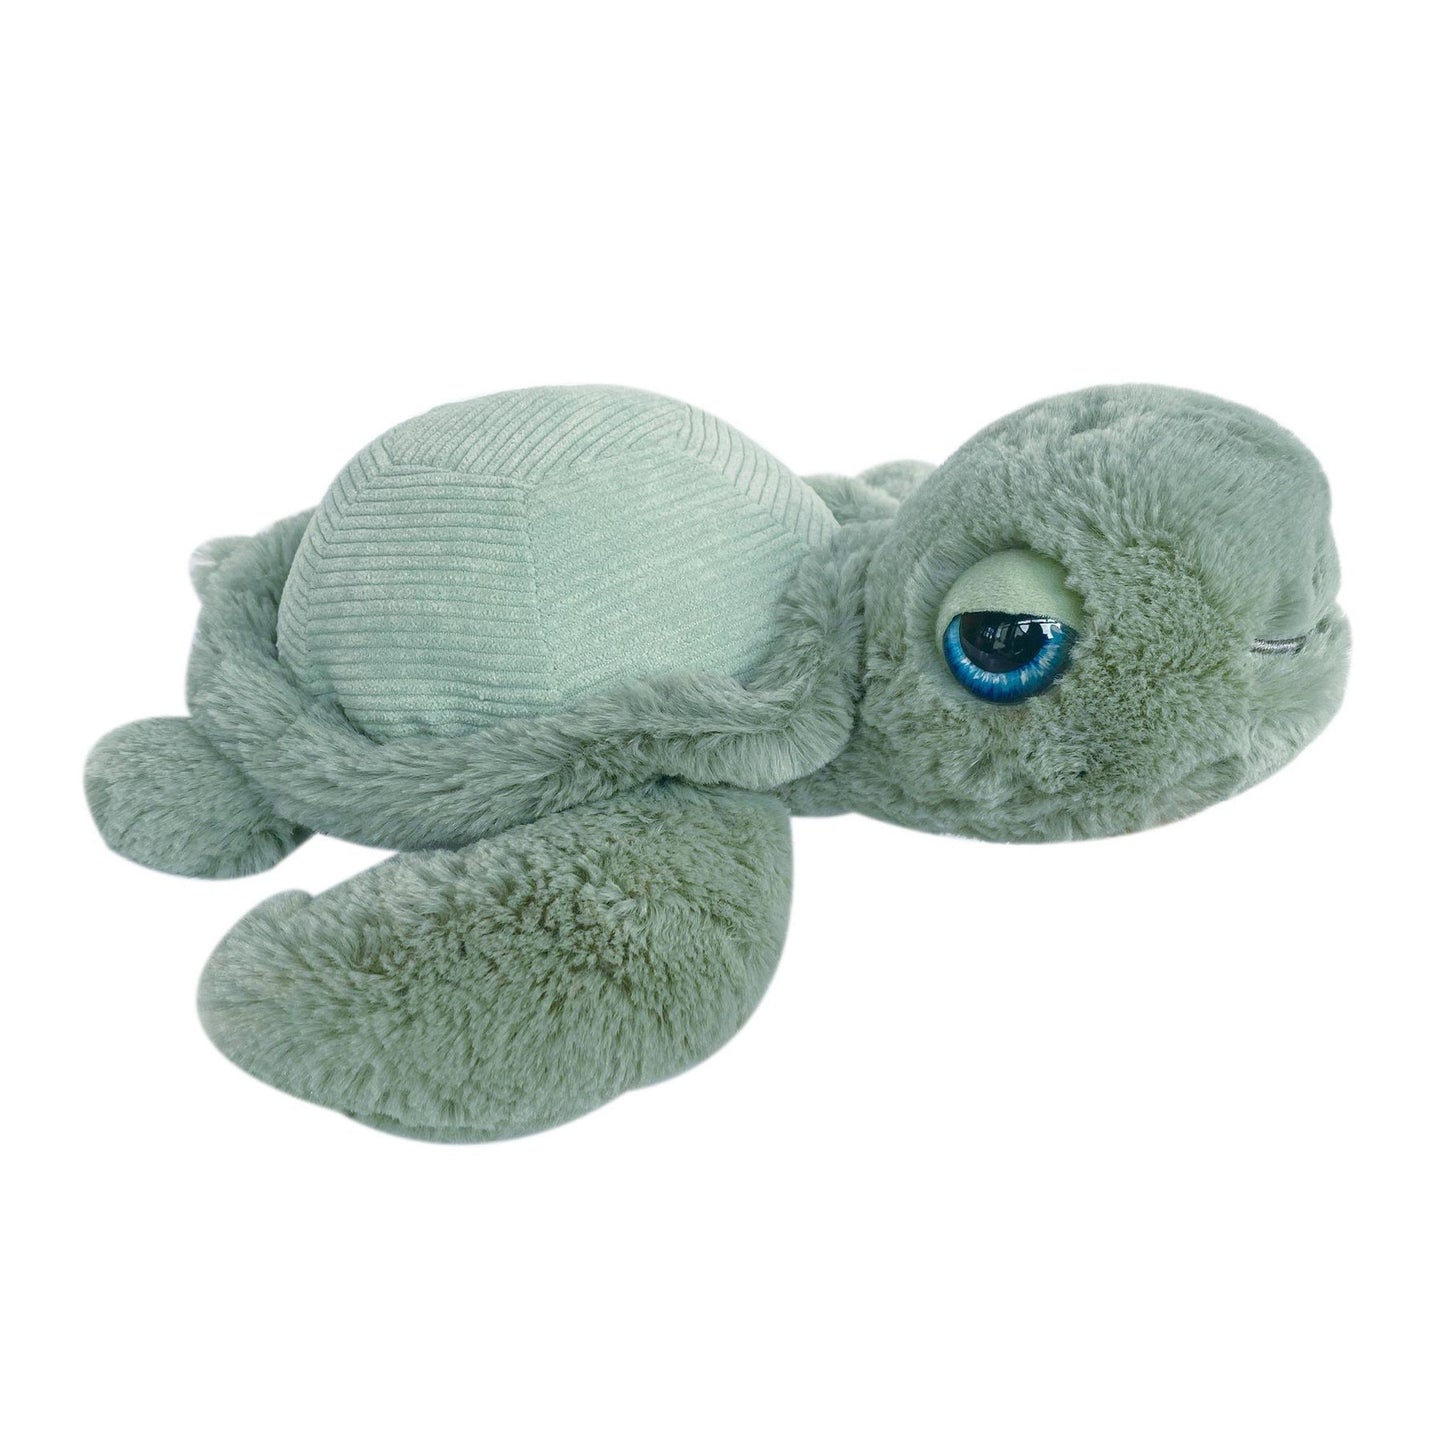 OB Designs - Tyler Turtle - Soft Toy